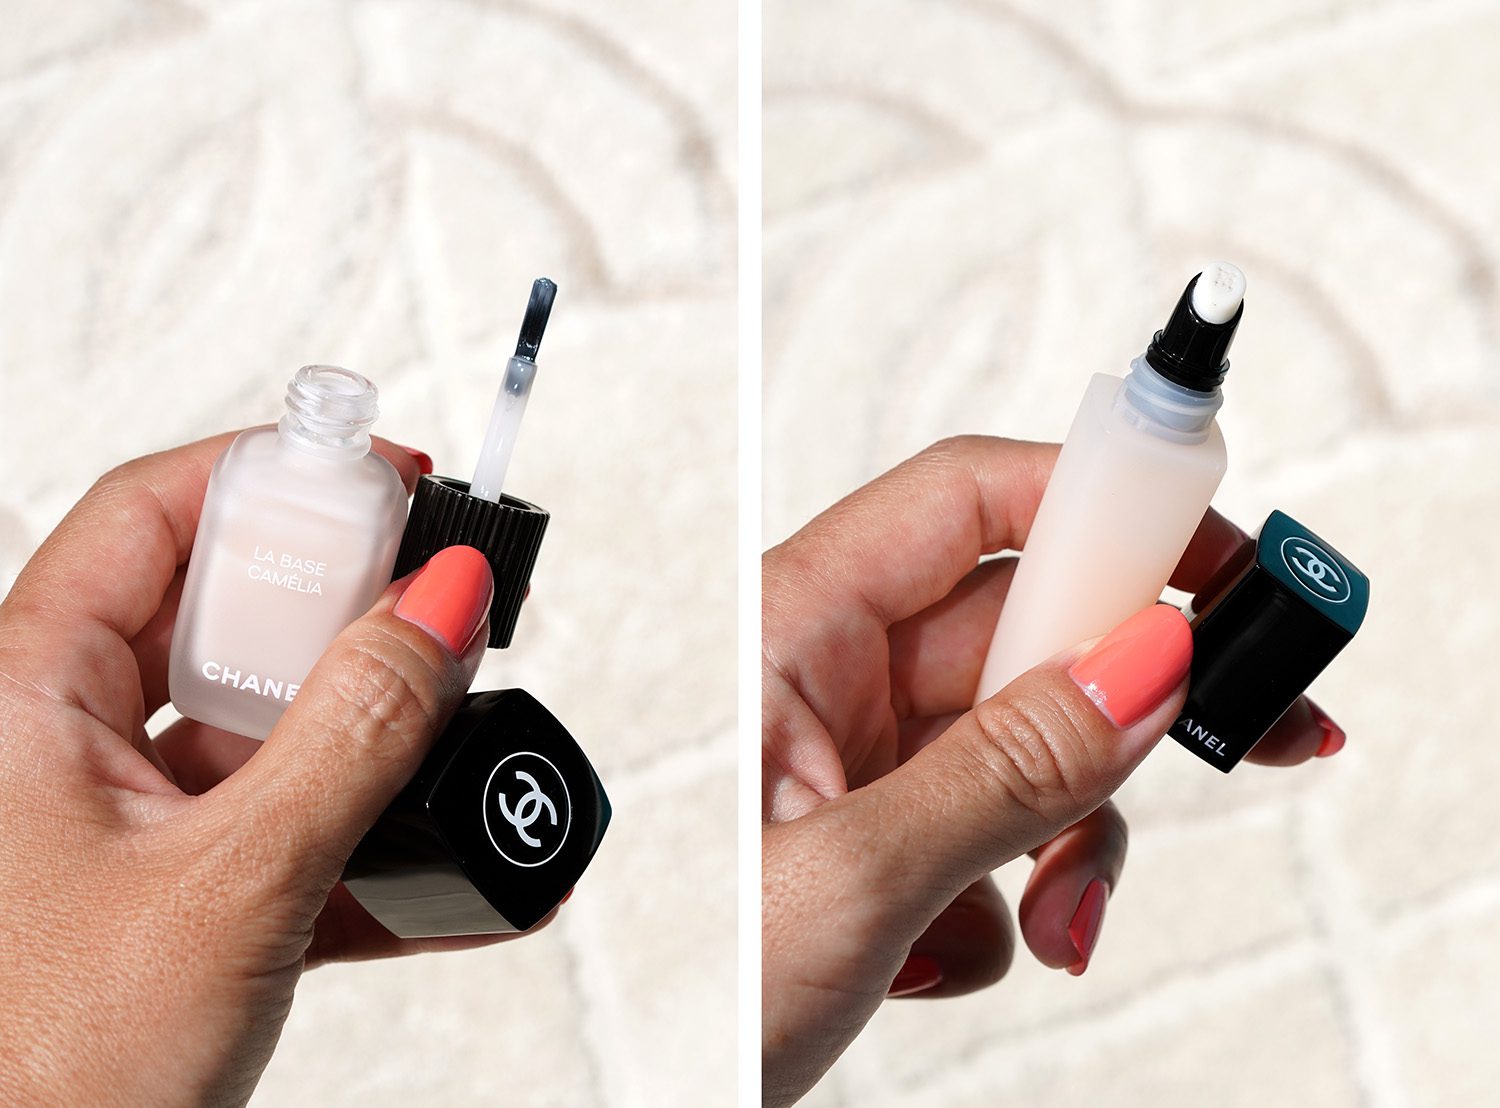 Chanel Le Vernis Summer Nails 2022 - The Beauty Look Book